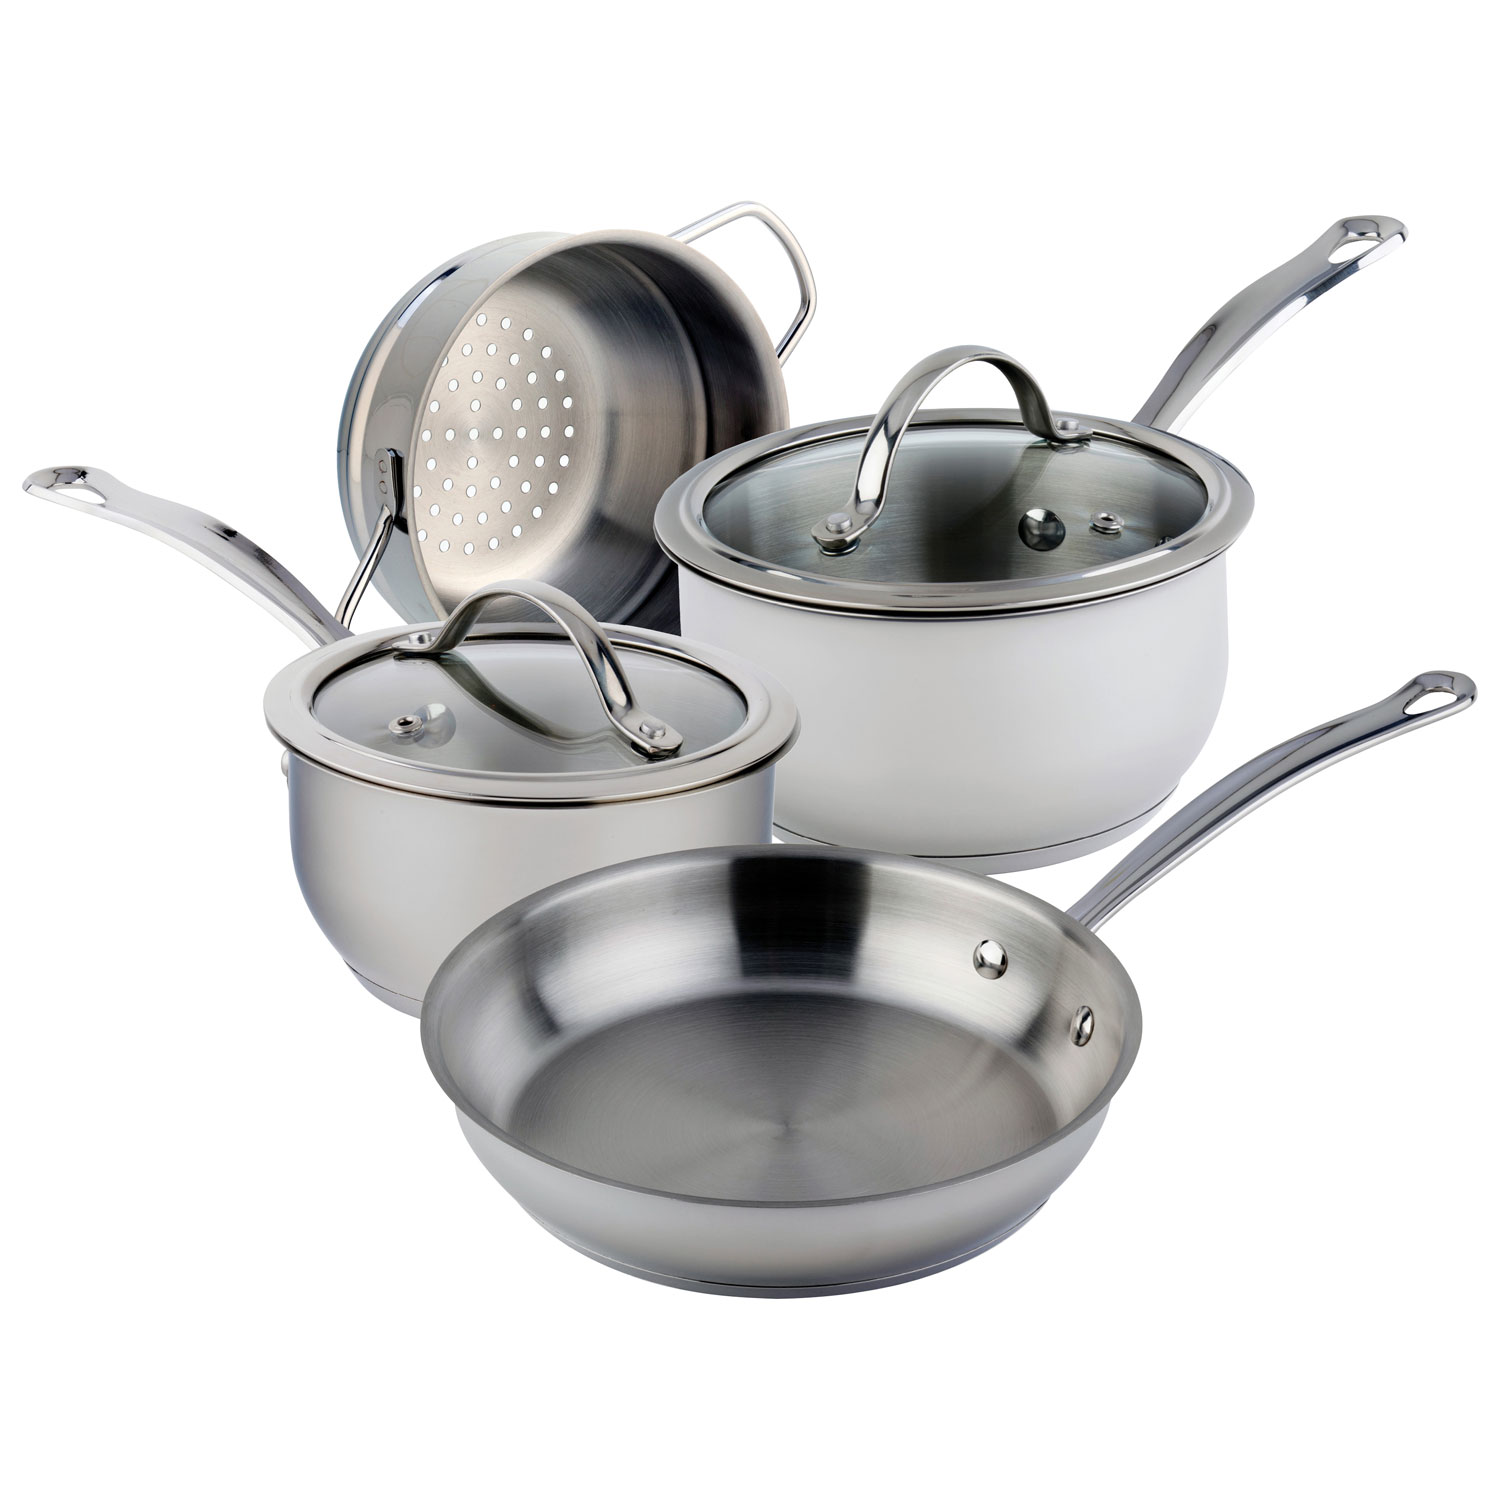 Meyer Nouvelle 6-Piece Cookware Set - Stainless Steel | Best Buy 